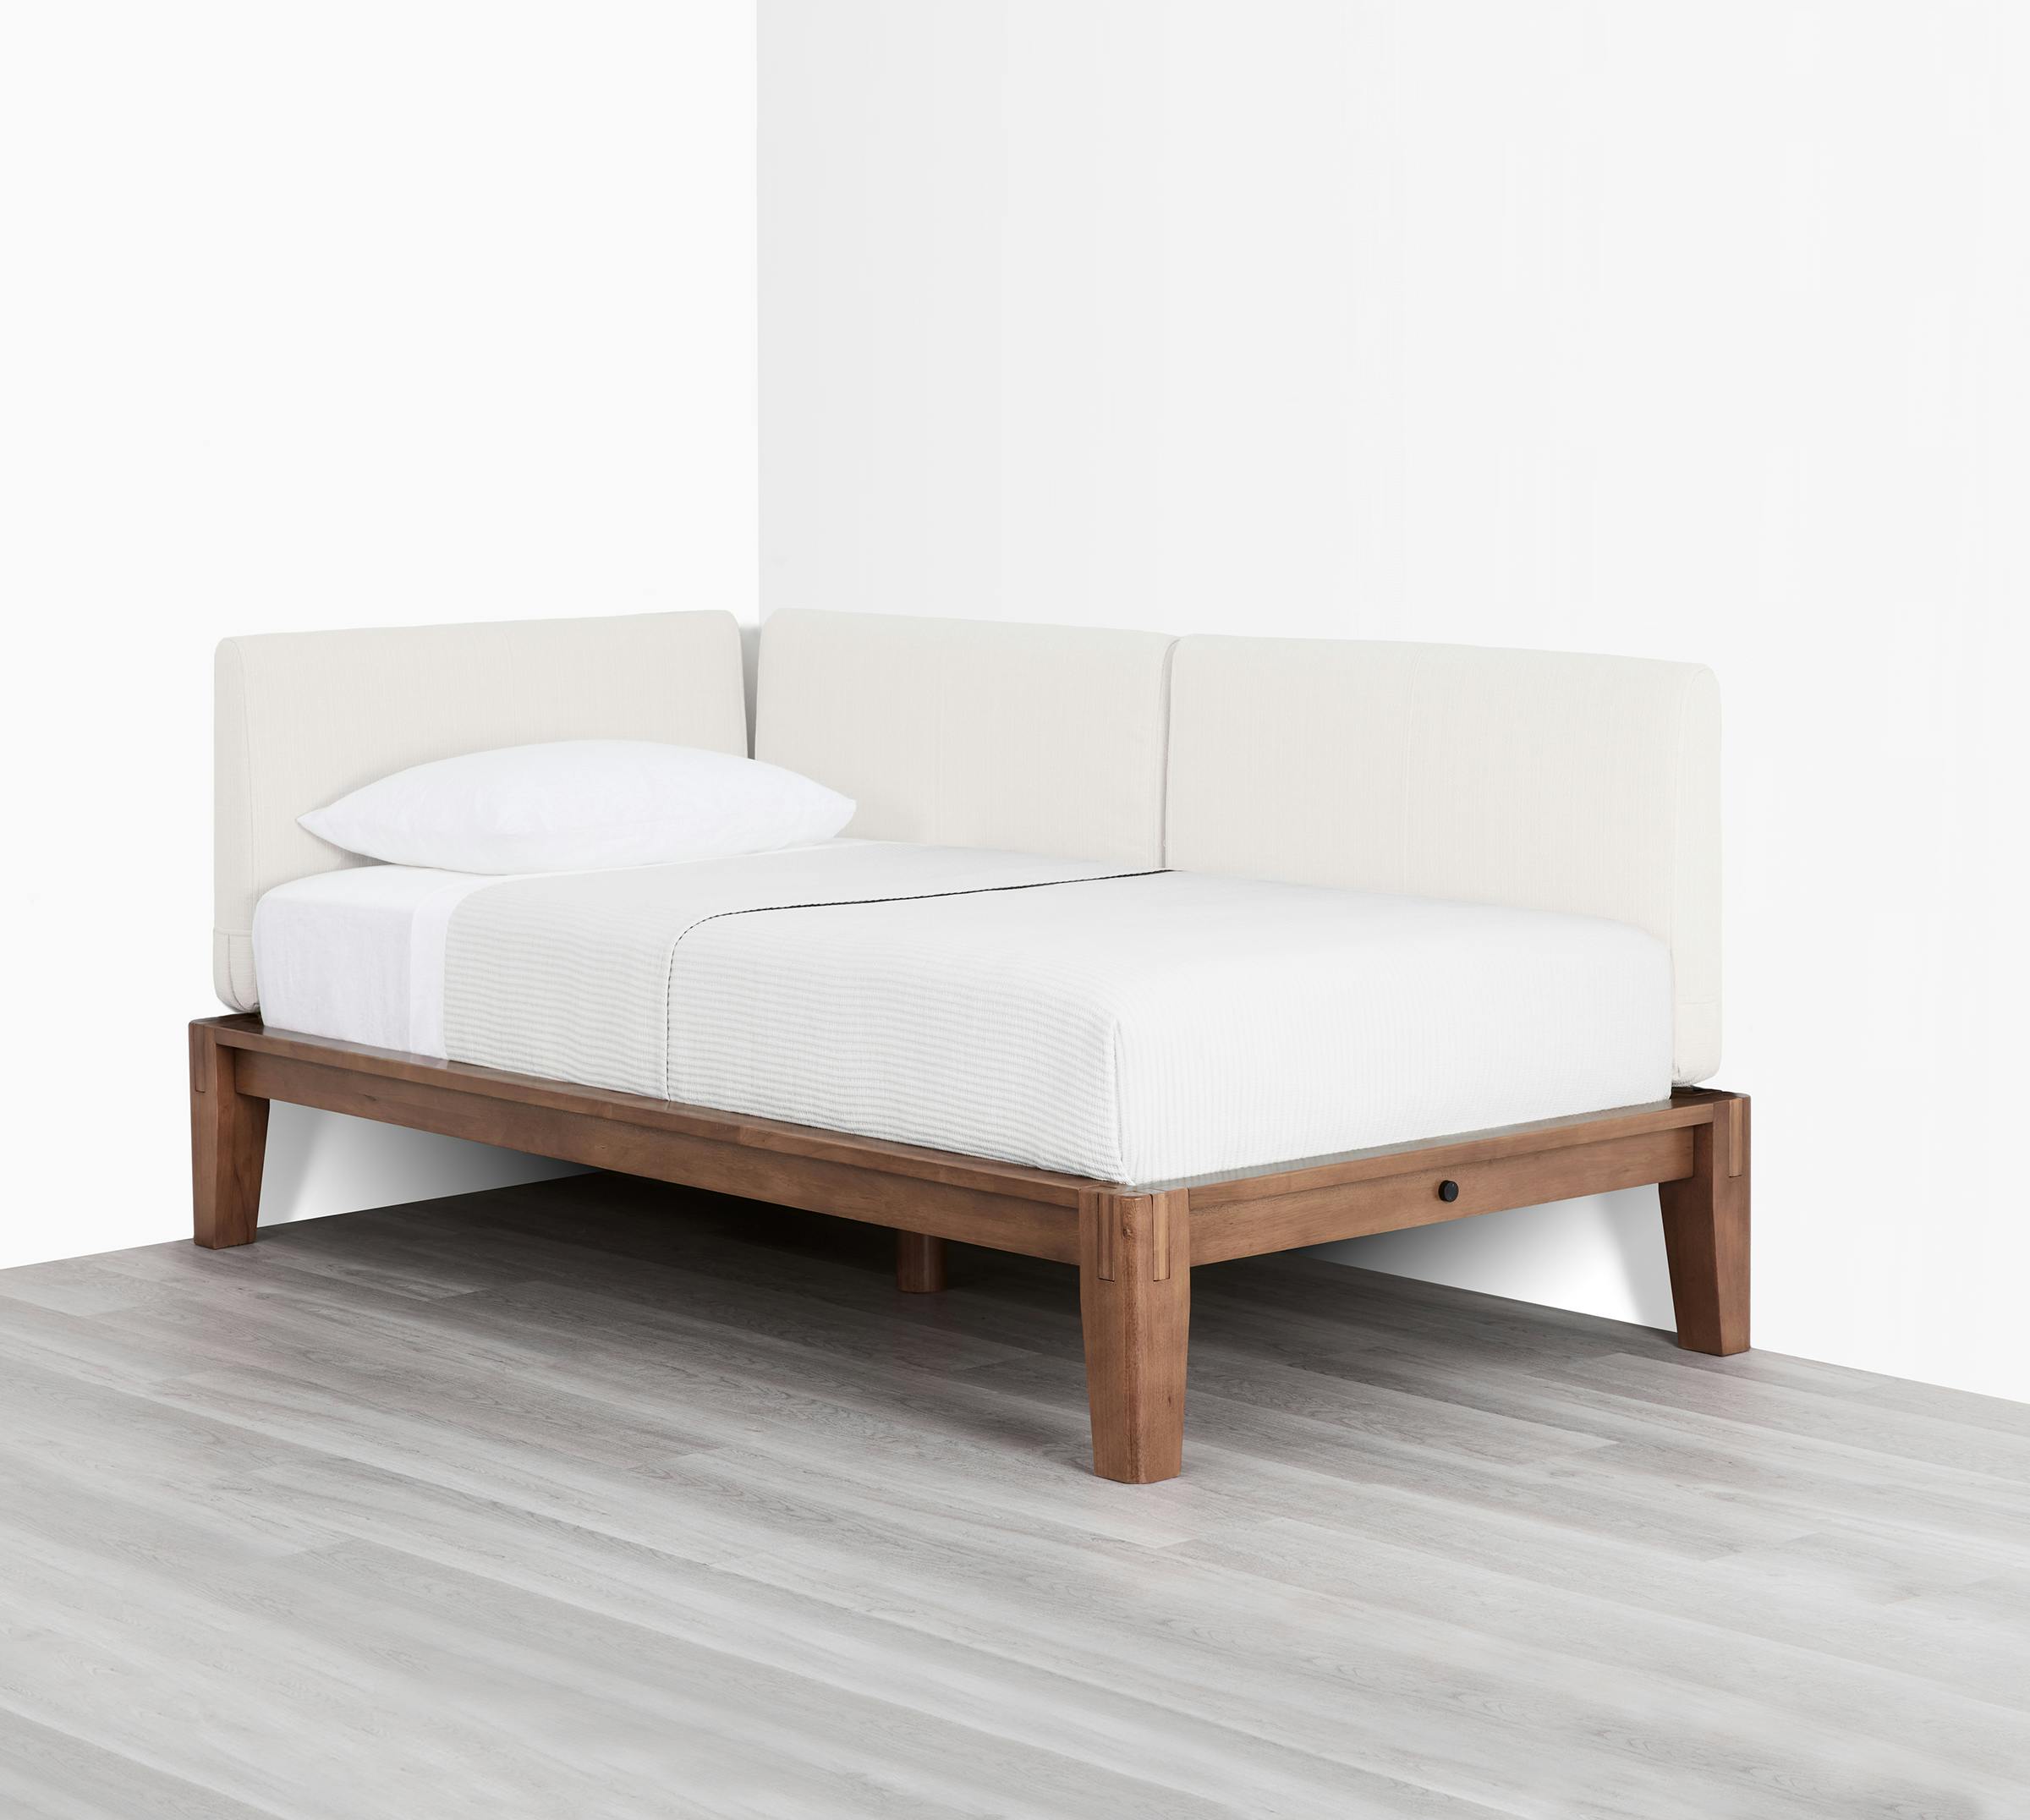 The Bed (Daybed / Walnut / Light Linen) - Diagonal